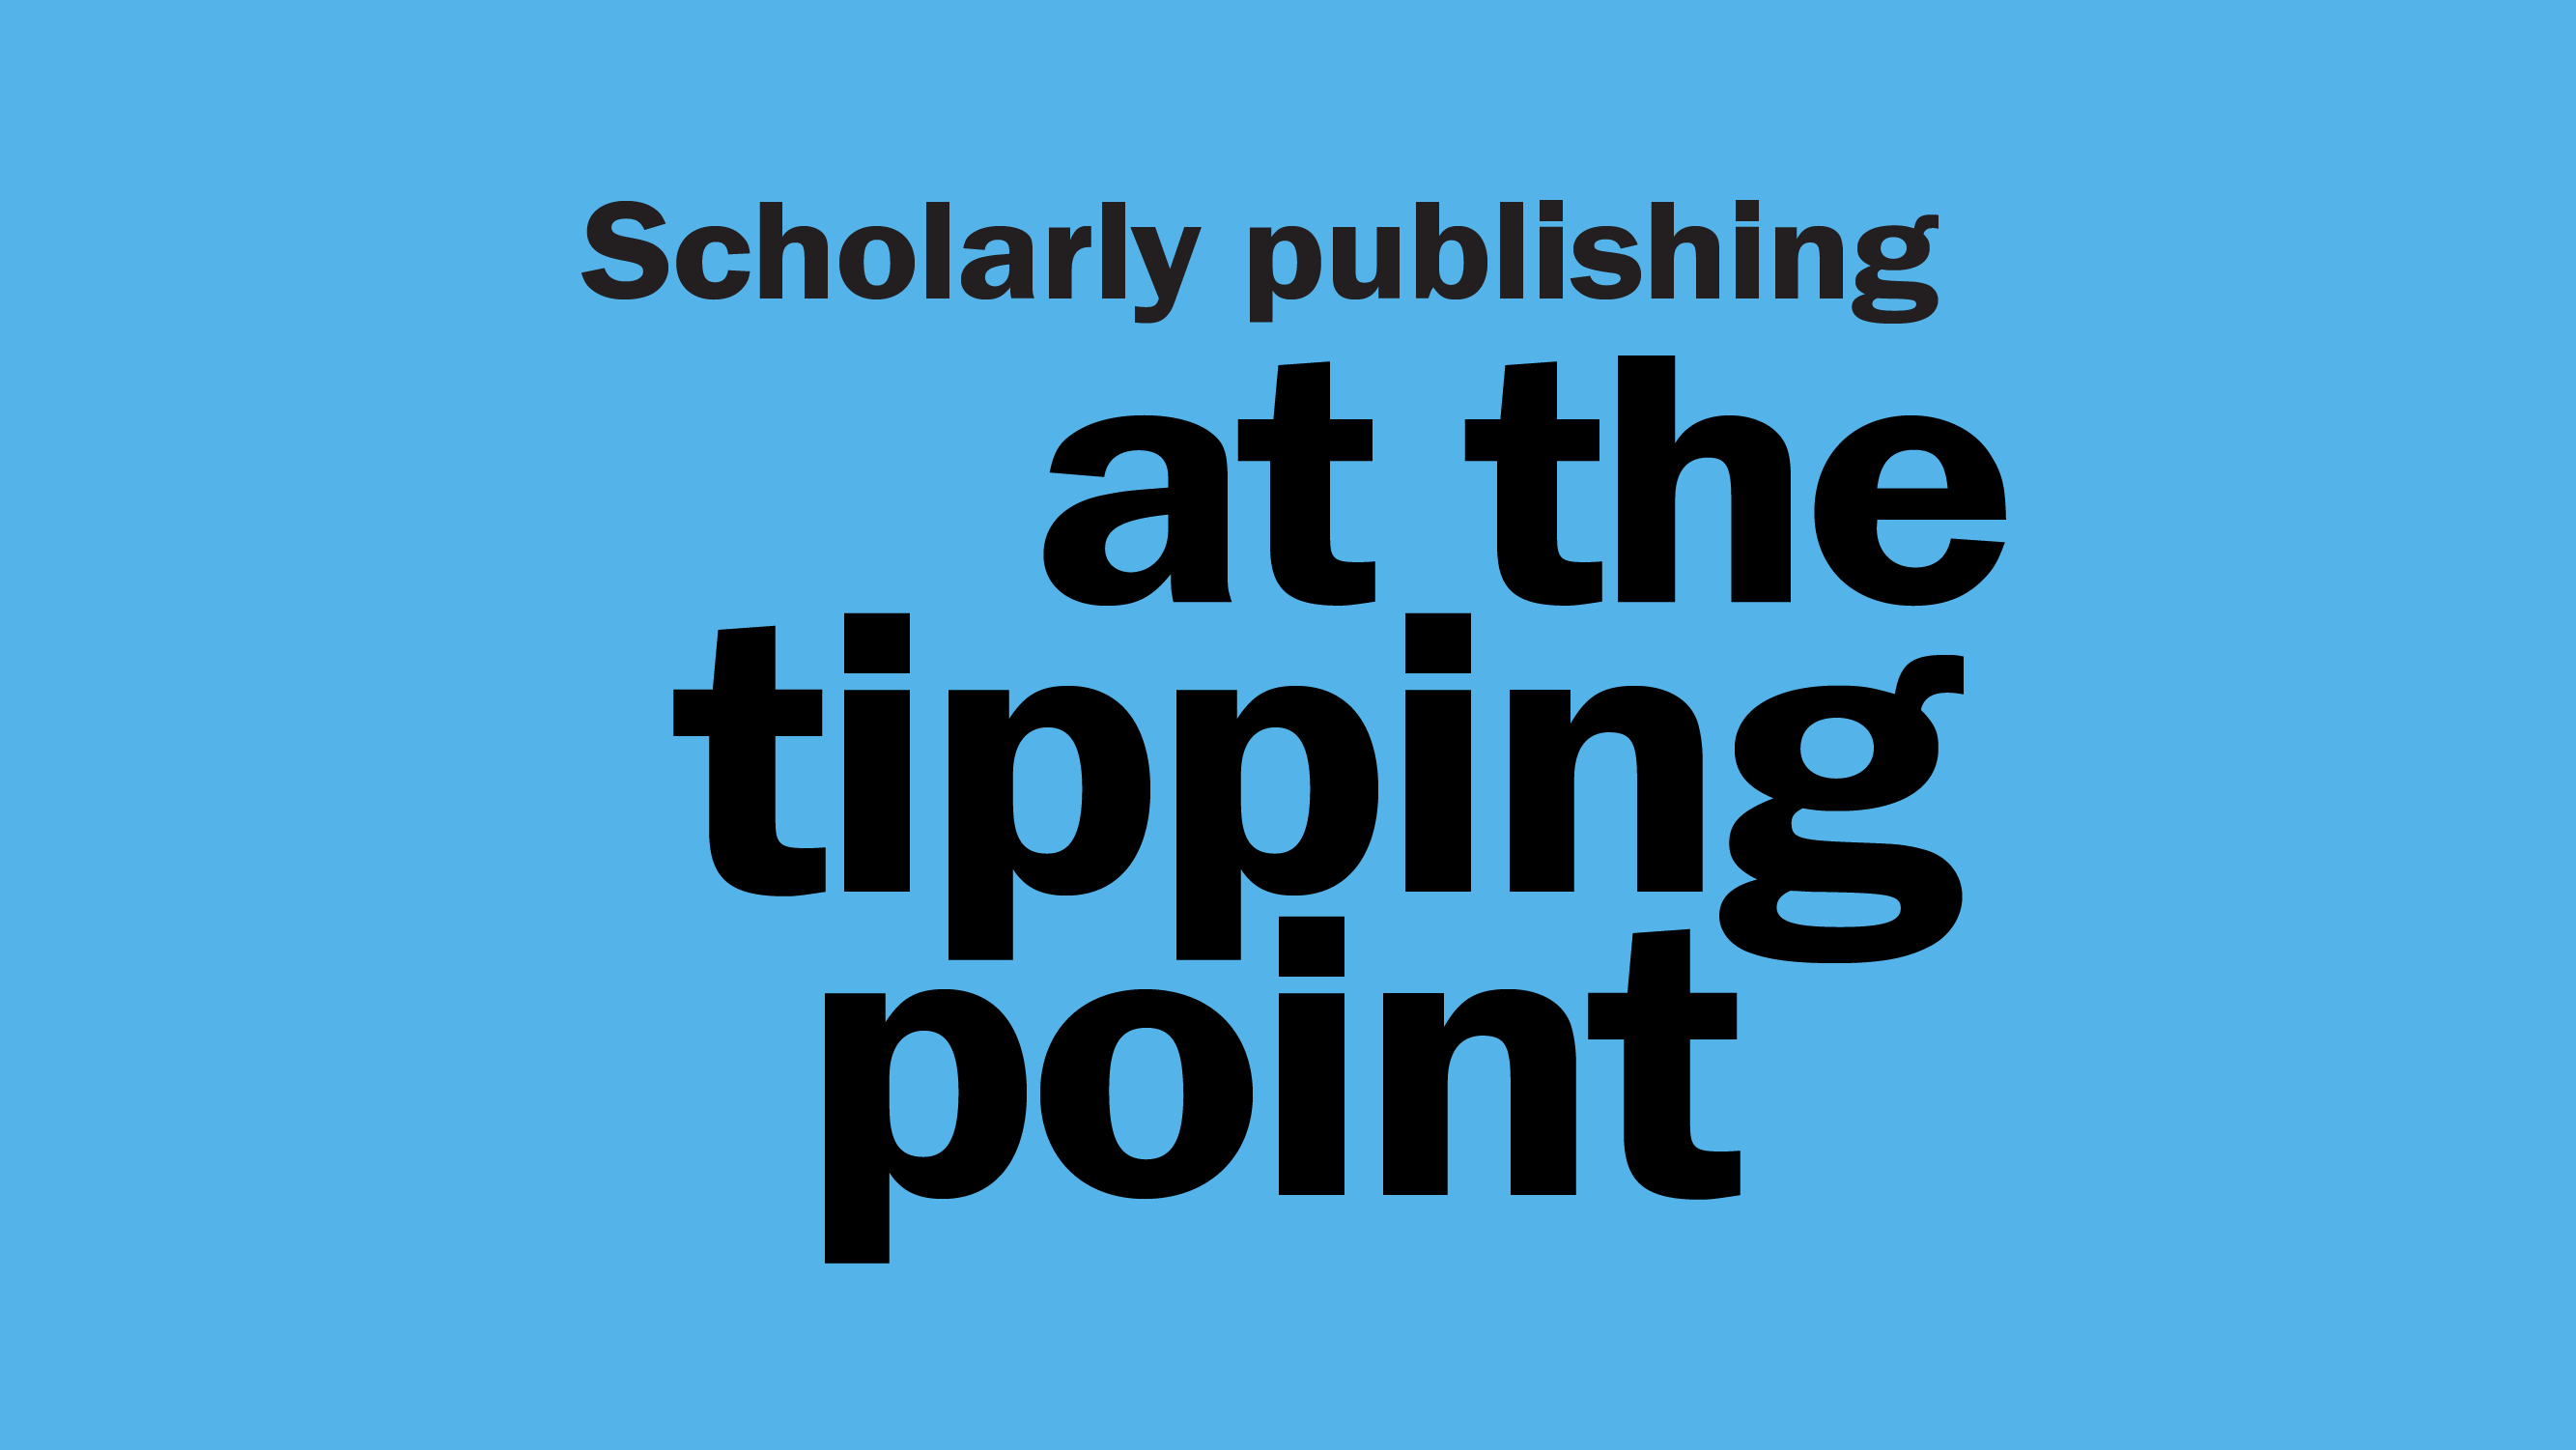 Scholarly publishing at the tipping point